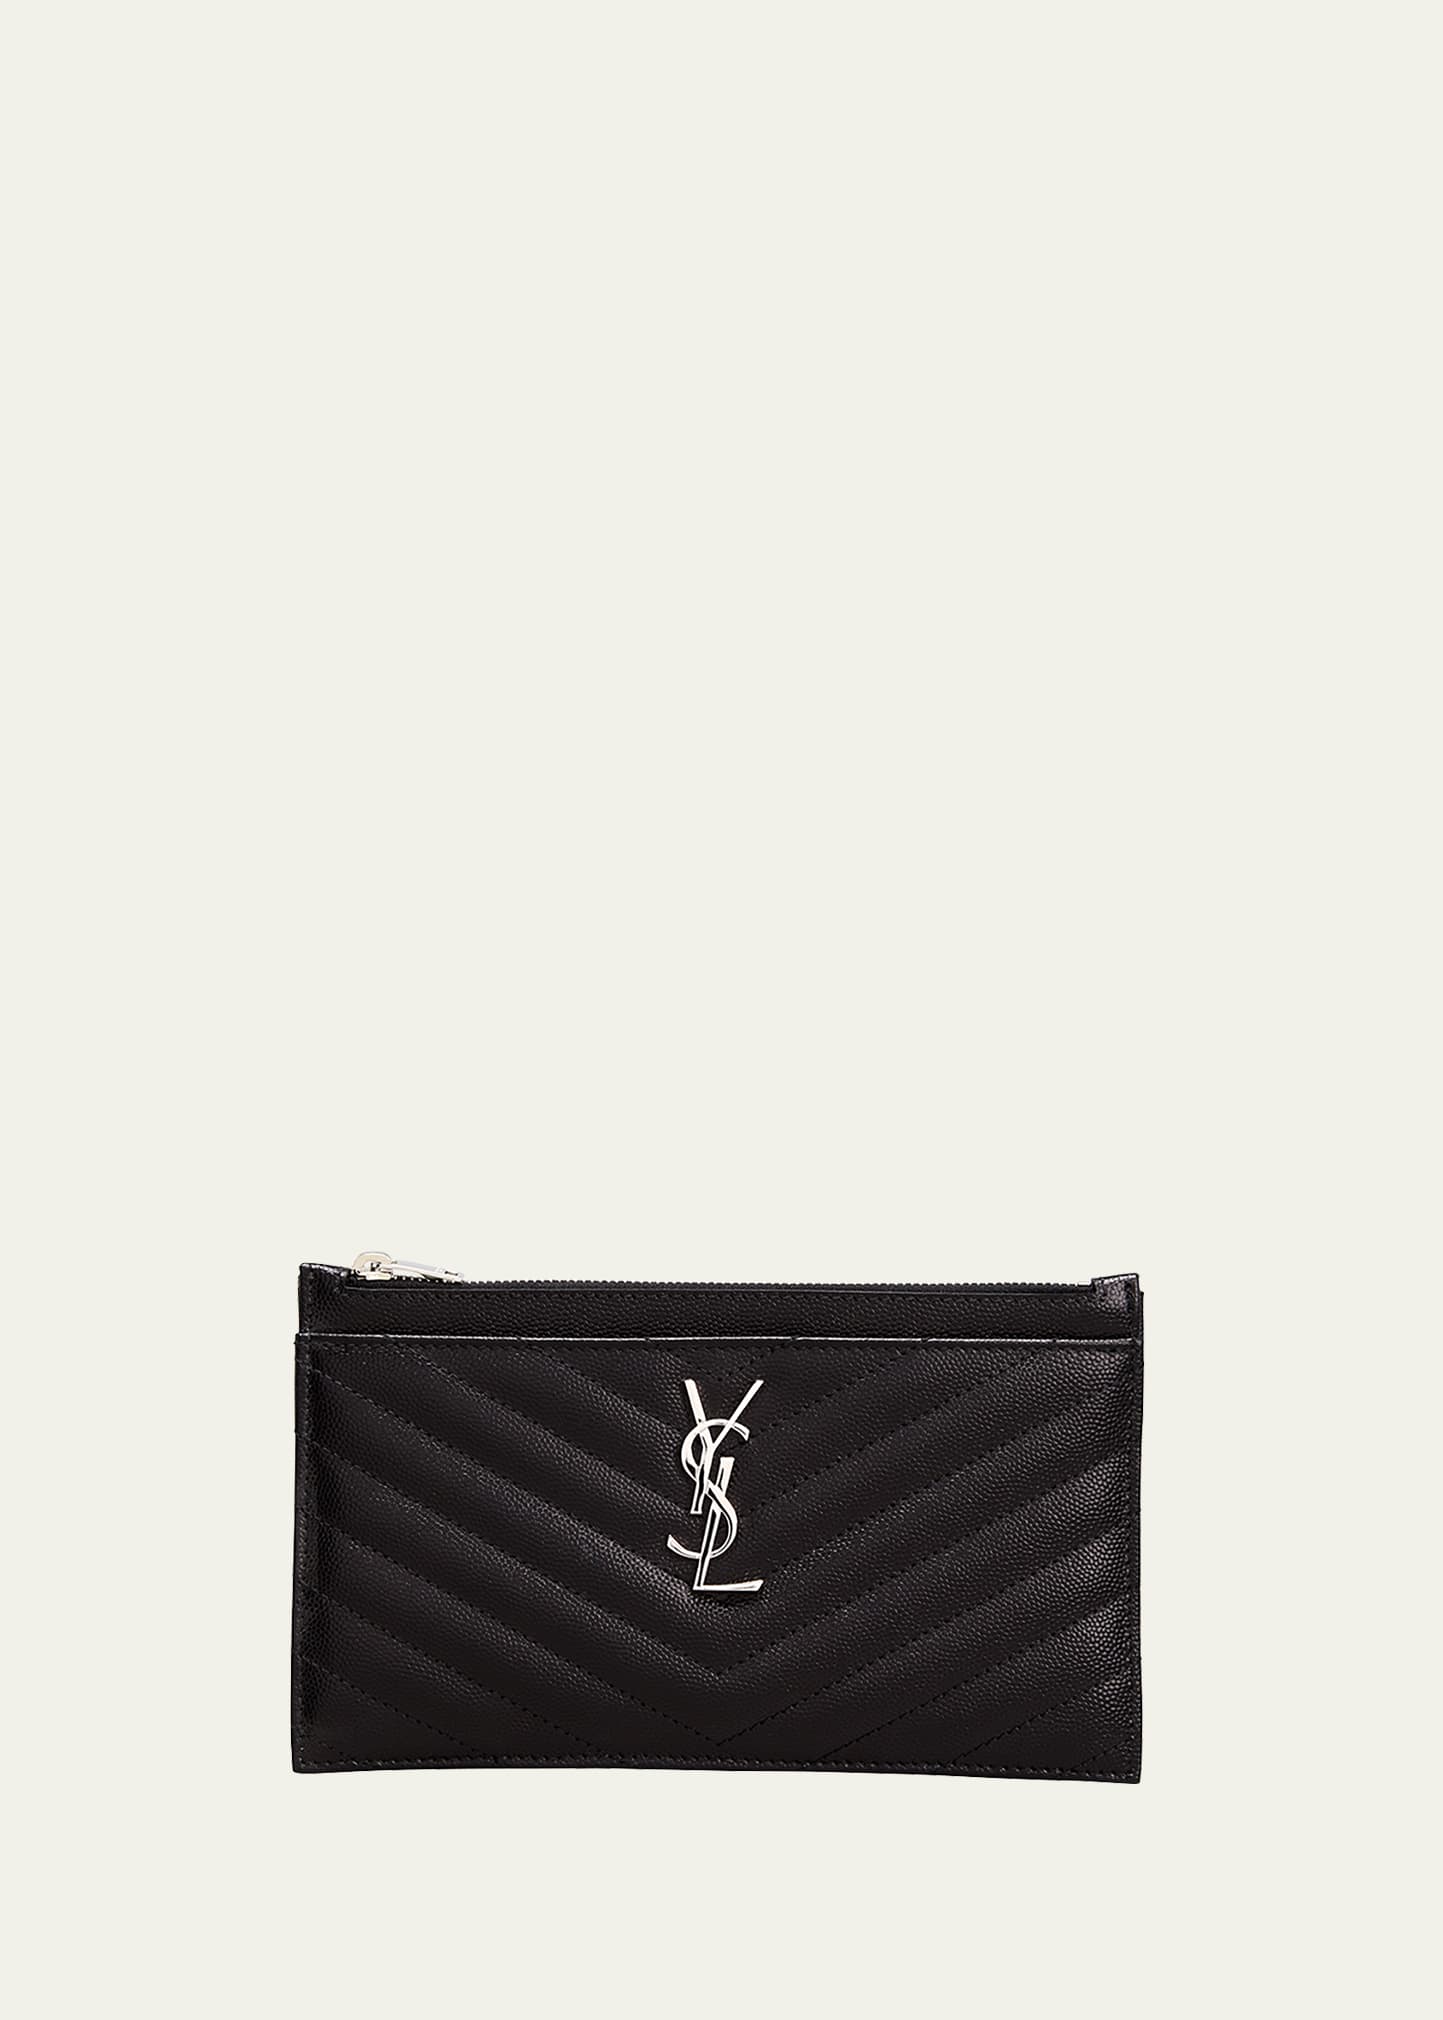 YSL Monogram Small Ziptop Bill Pouch in Grained Leather